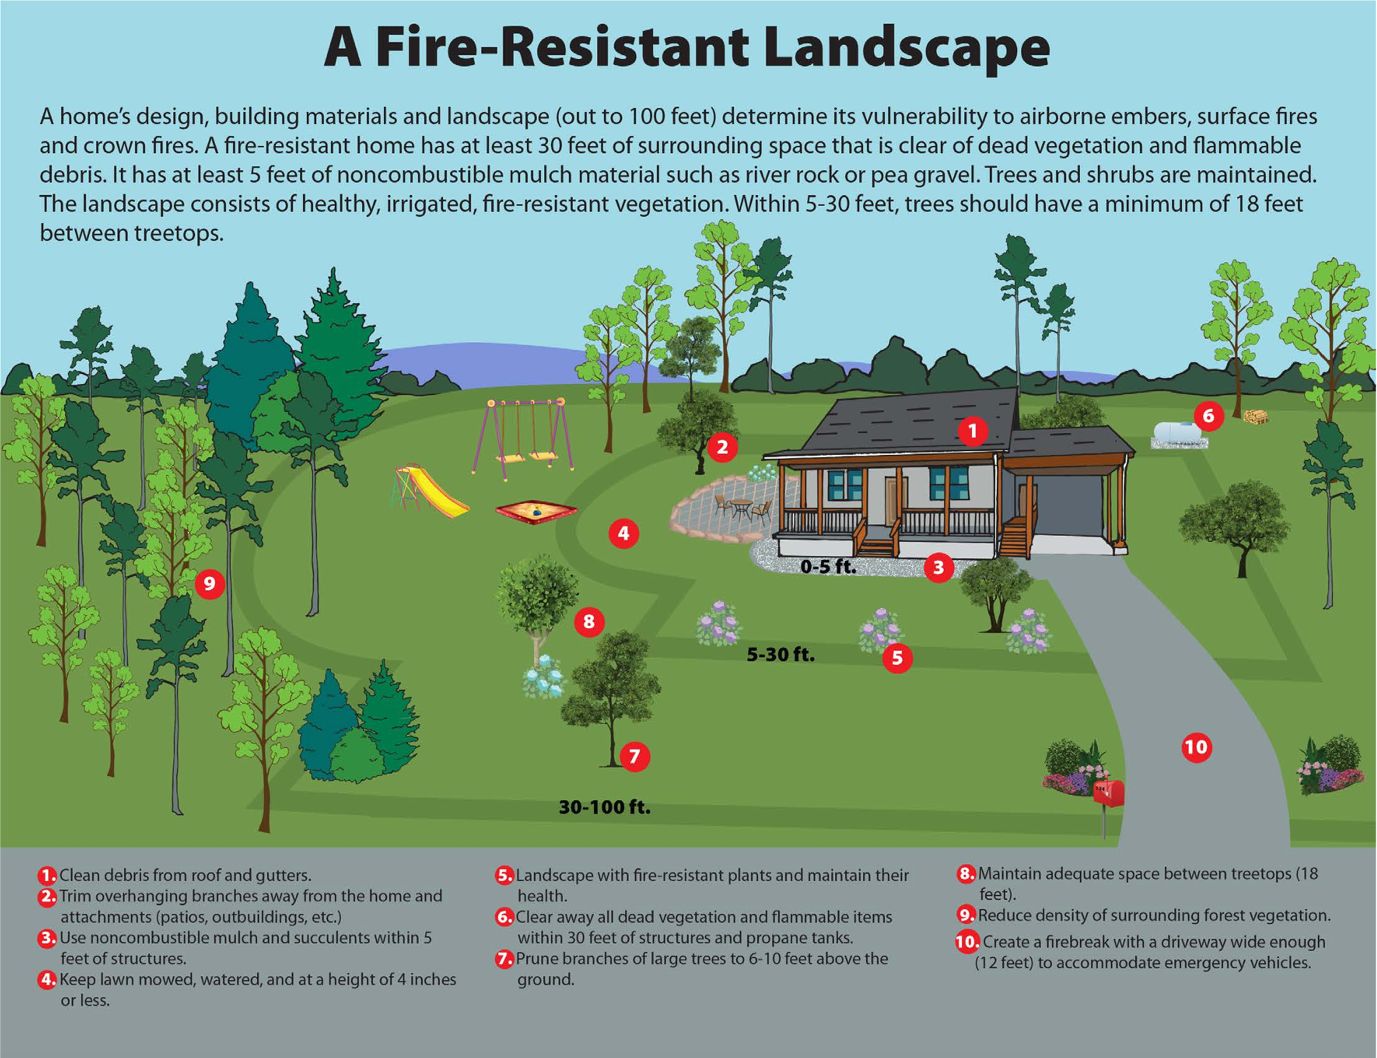 Diagram indicating the main principles of firewise landscaping. 